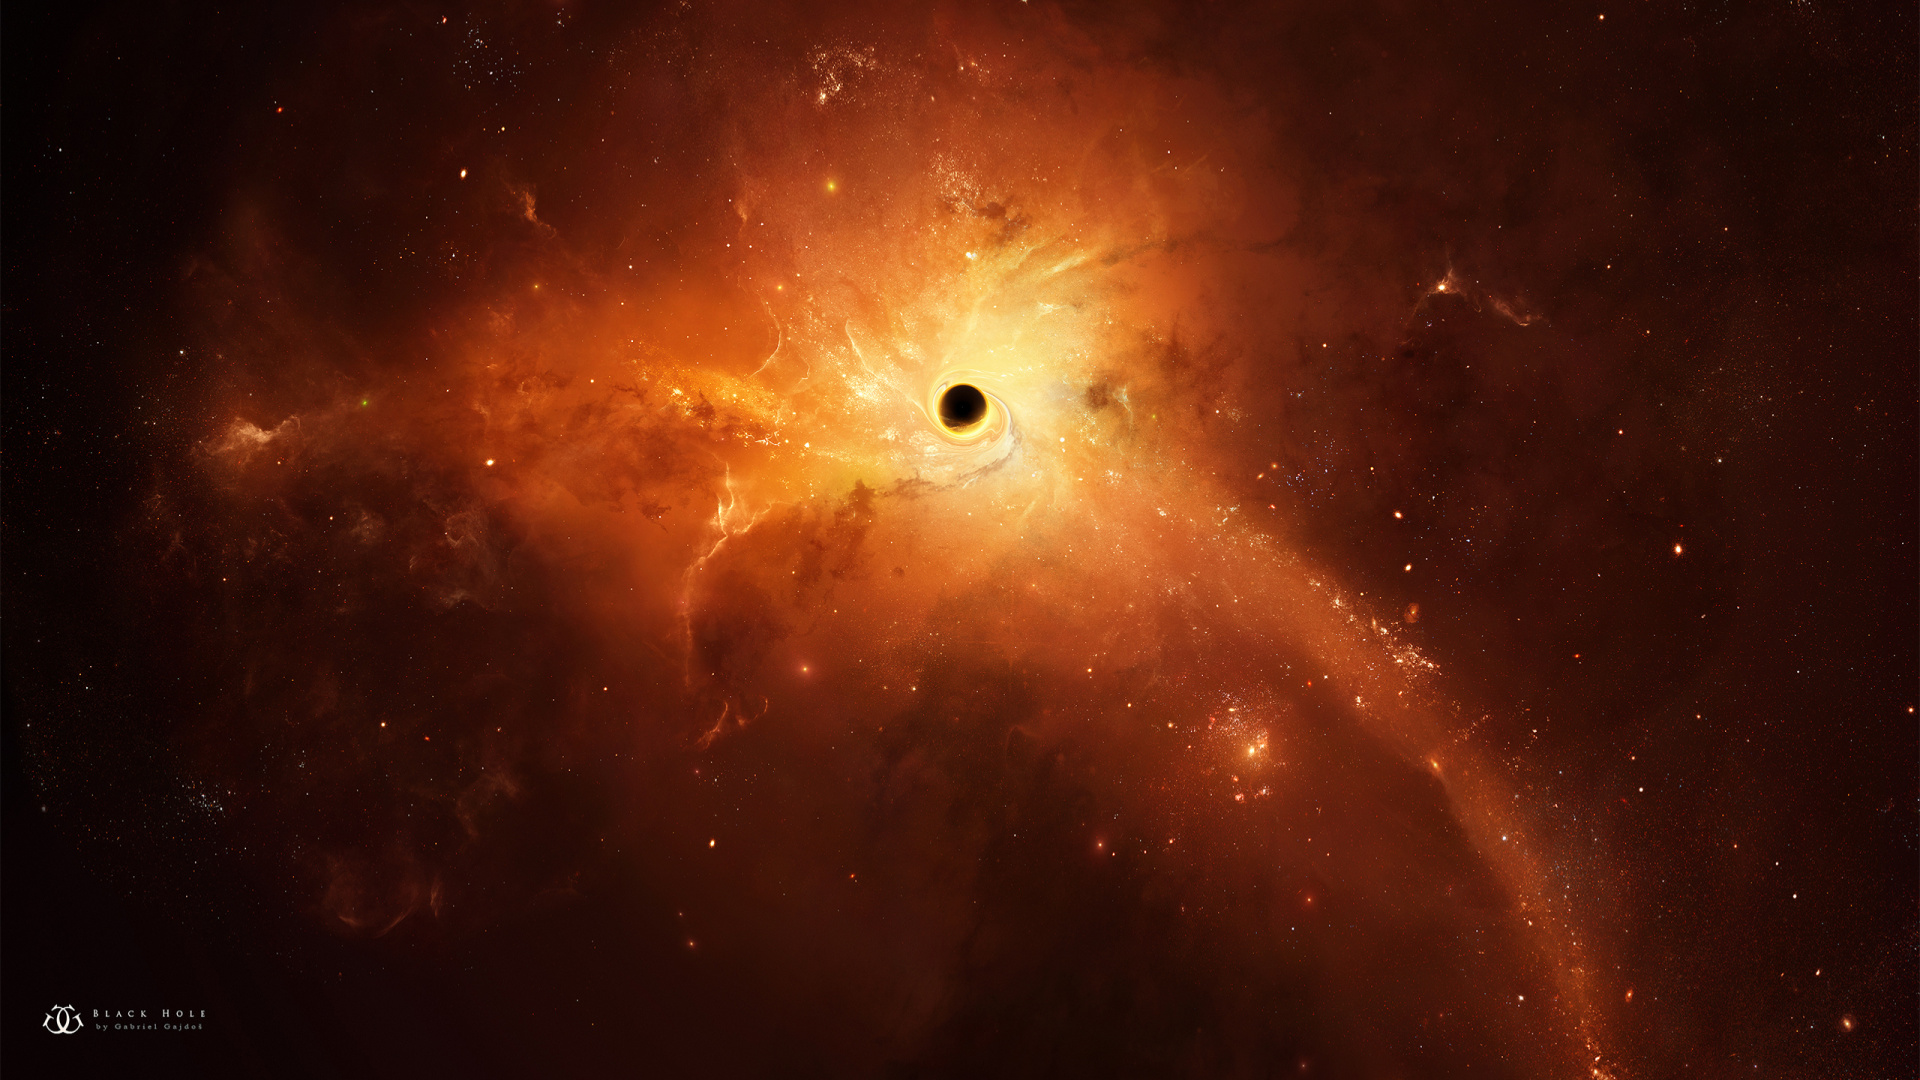 Black Hole Wallpapers (33+ images inside)